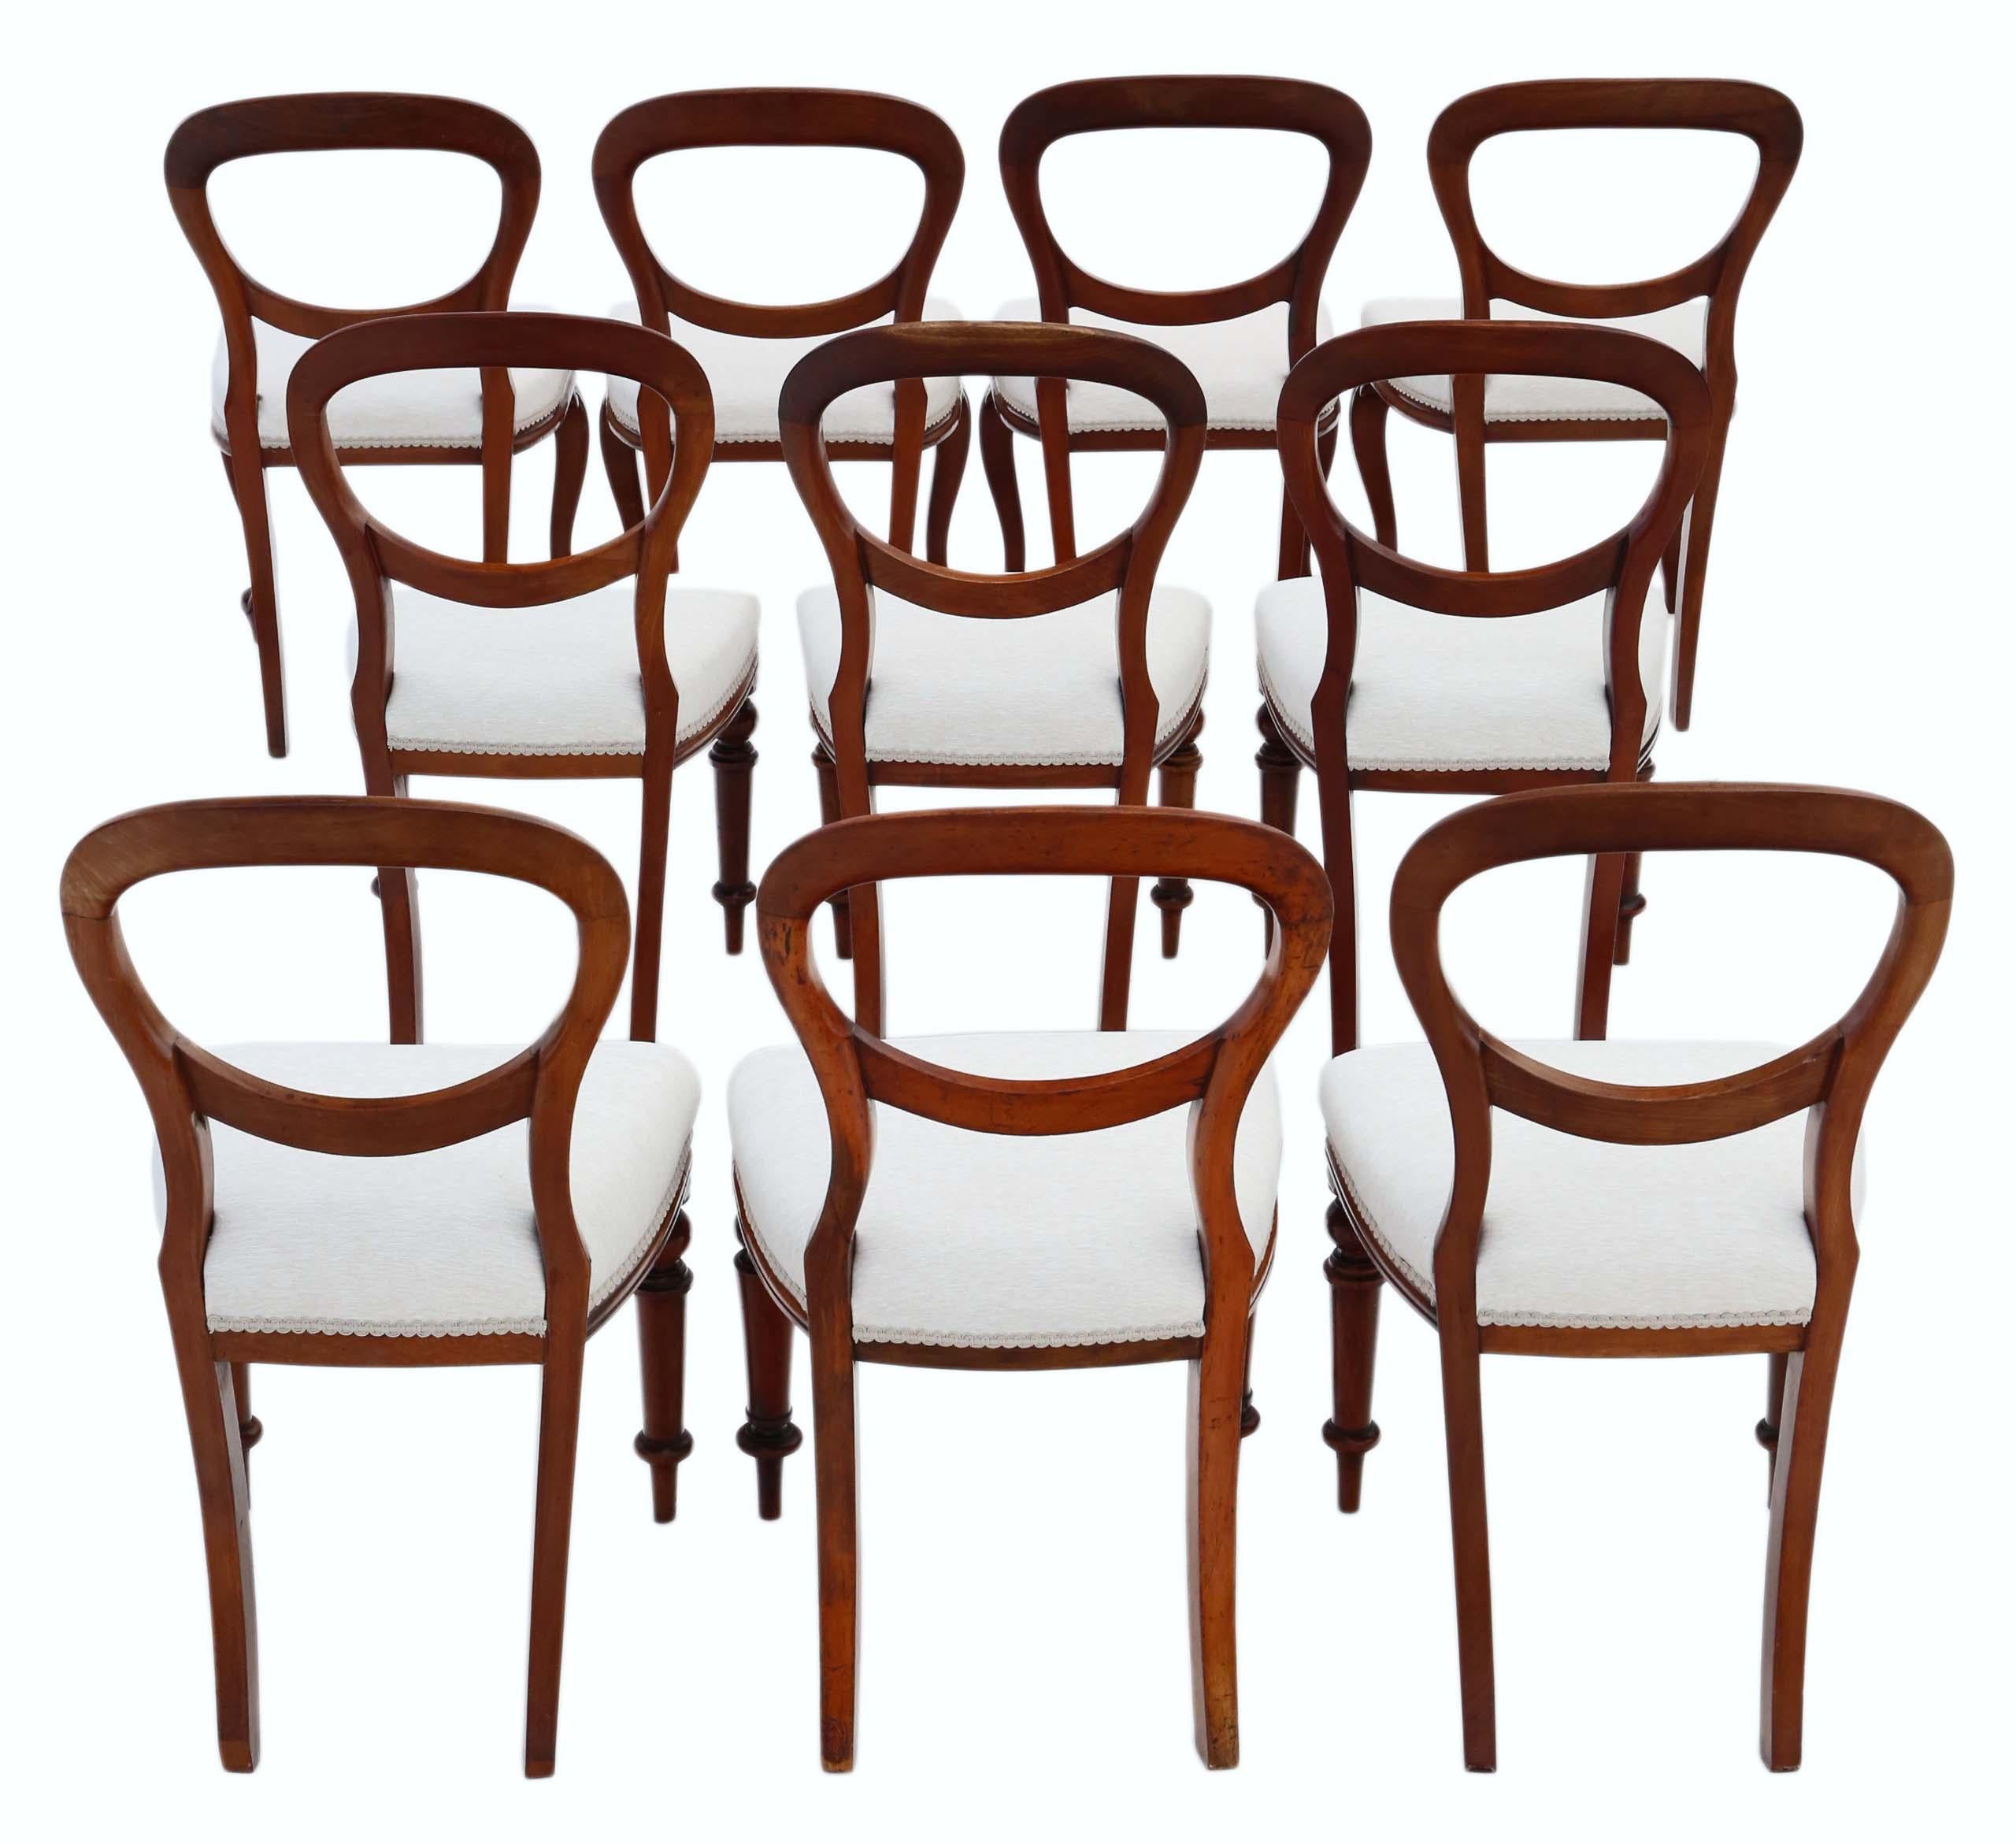 Harlequin set of 10 (5 plus 4 plus 1) Victorian mahogany balloon back dining chairs, circa 1880.
Full of age charm and character. Very best colour and patina.
Solid, with no loose joints.
Good new upholstery in a heavy weight upholstery fabric,